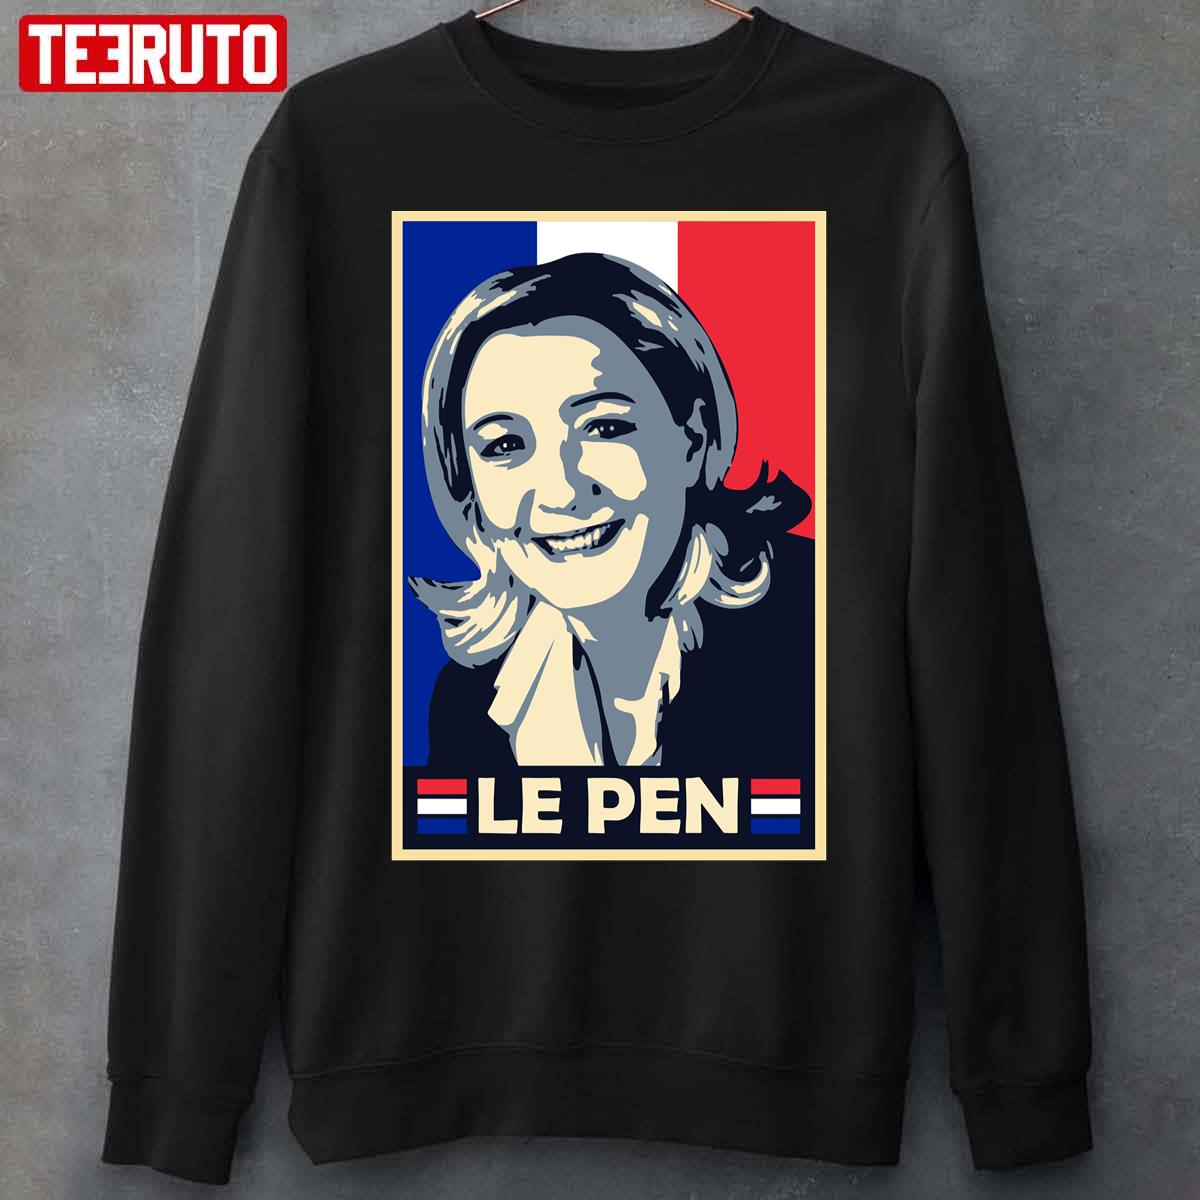 Marine Le Pen France President National Rally Front Politician Unisex T-Shirt